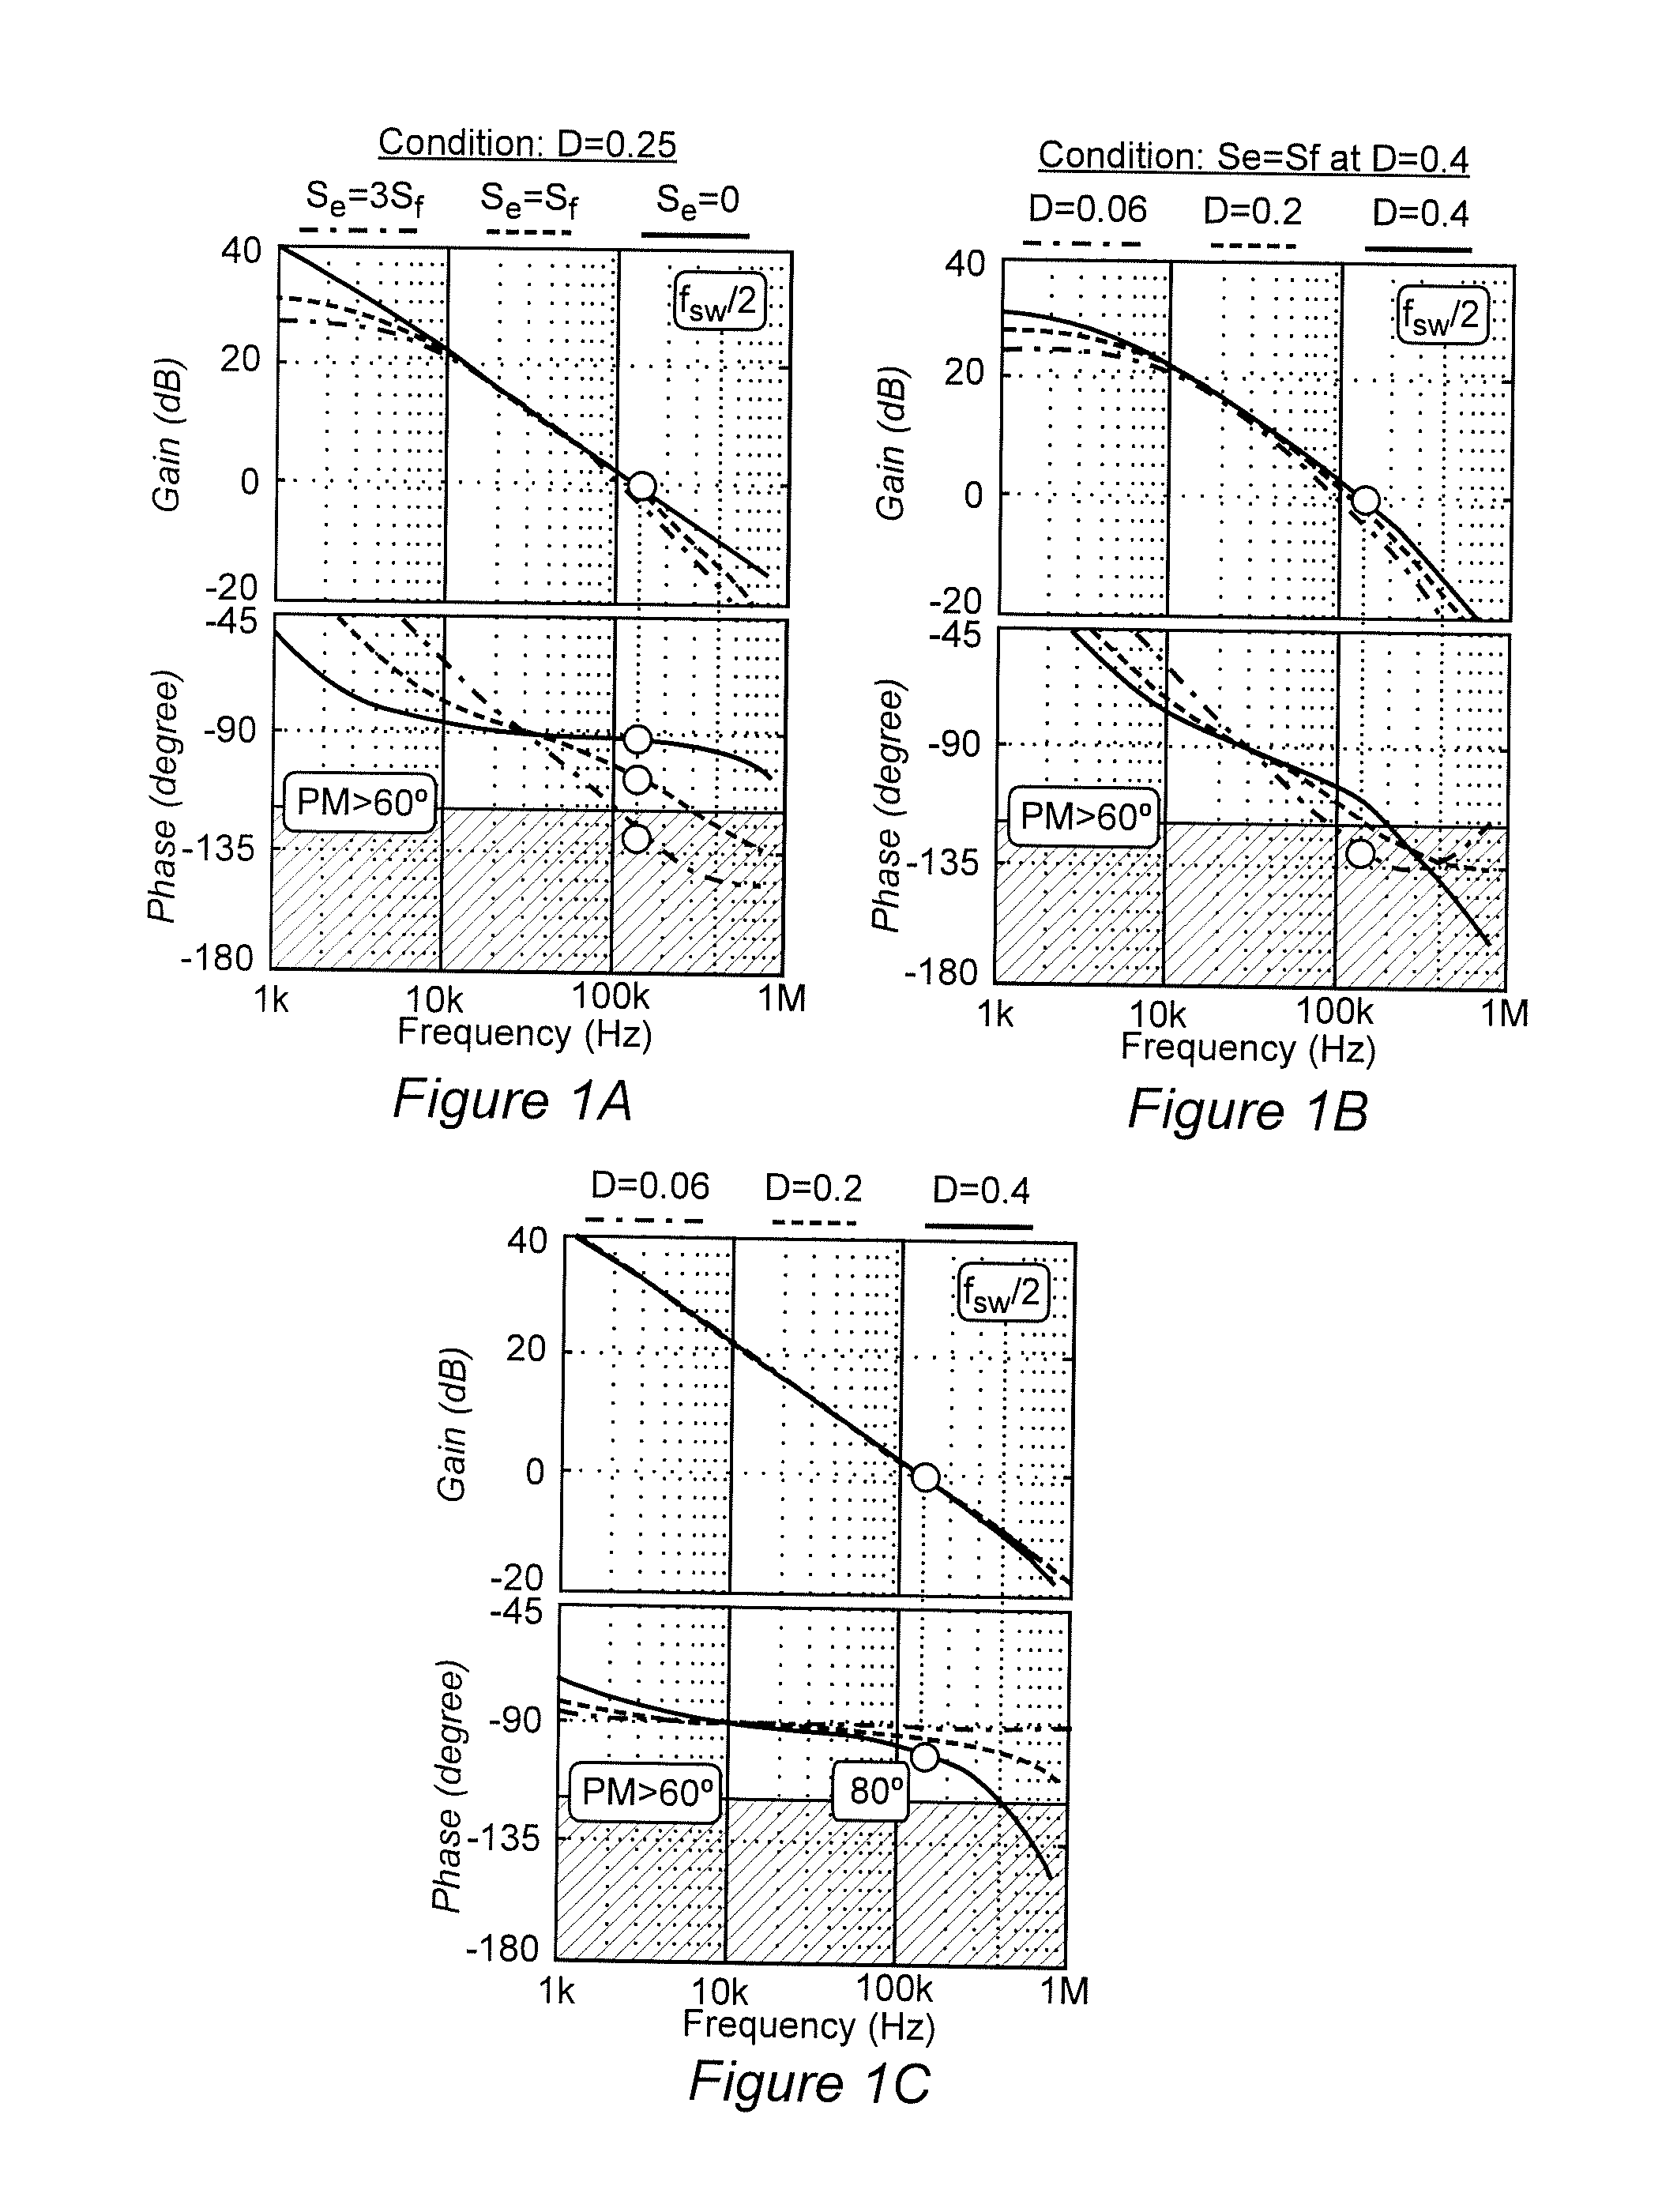 Hybrid Interleaving Structure with Adaptive Phase Locked Loop for Variable Frequency Controlled Switching Converter